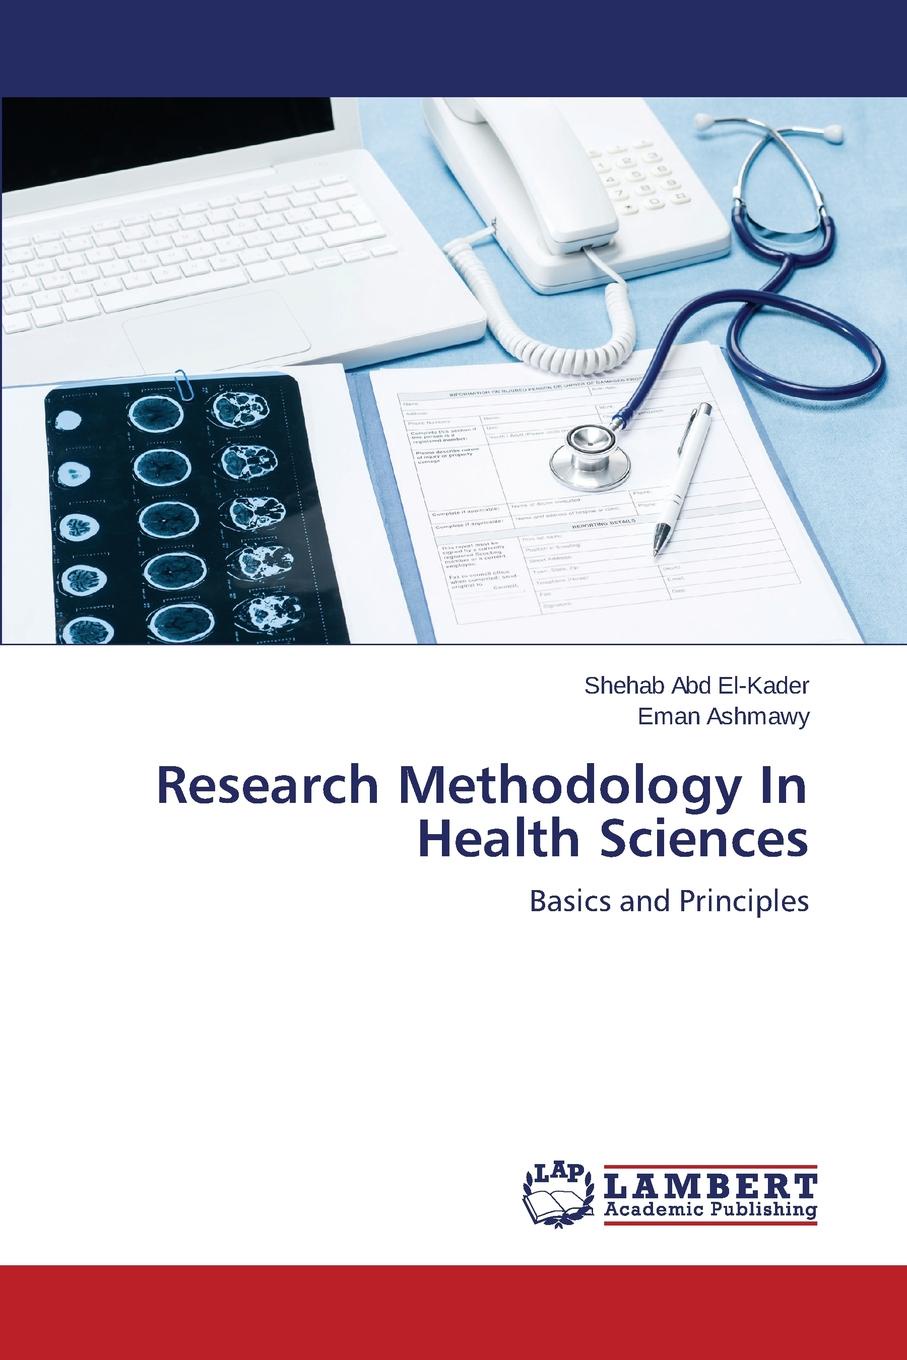 Research Methodology in Health Sciences